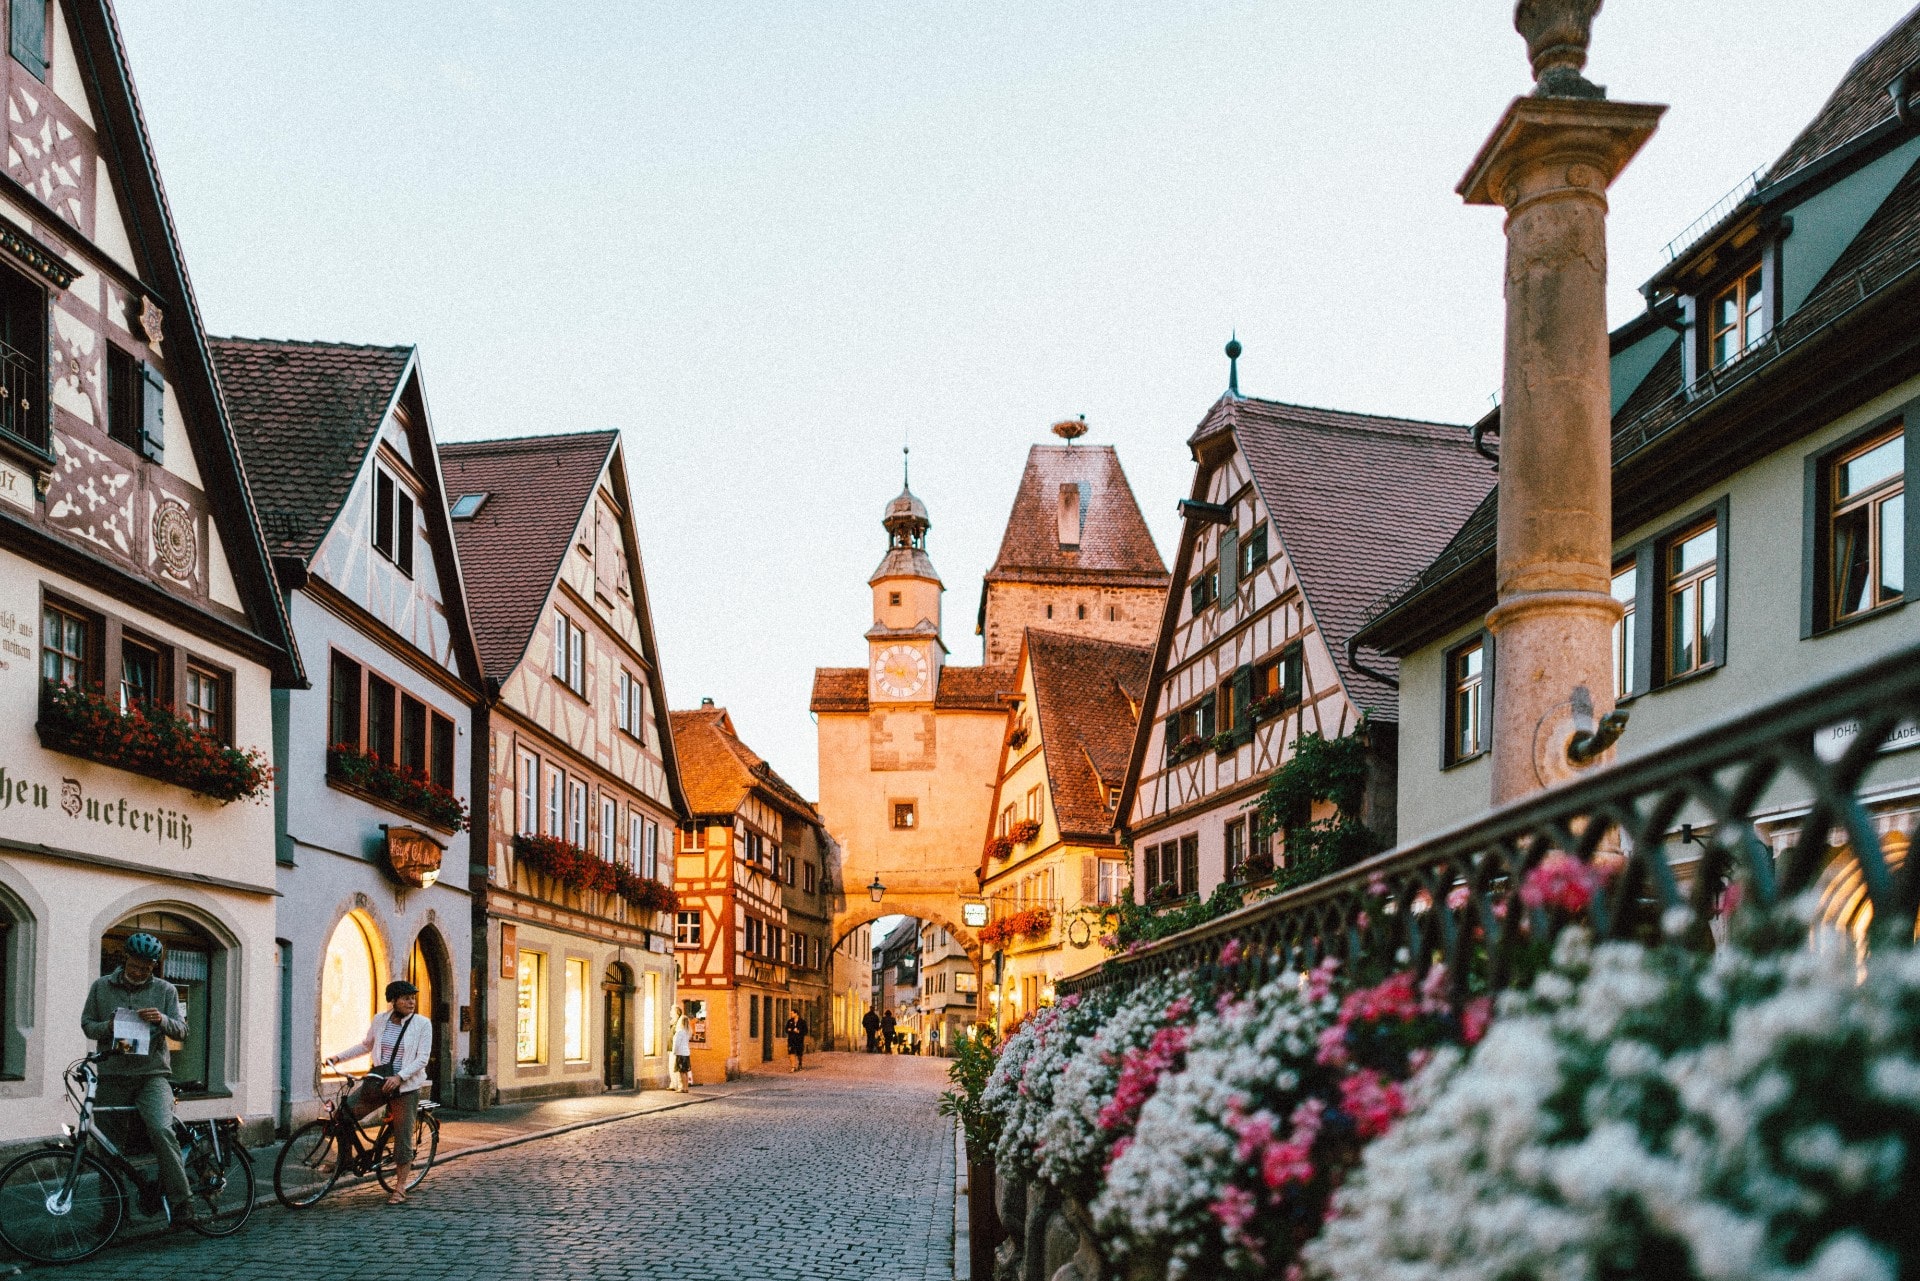 beautiful-fairytale-european-town-city-at-sunset-a-street-of-old-colourful-houses-with-flowers-lit-up-by-lights-at-night-interrail-budget-interrailing-on-a-budget